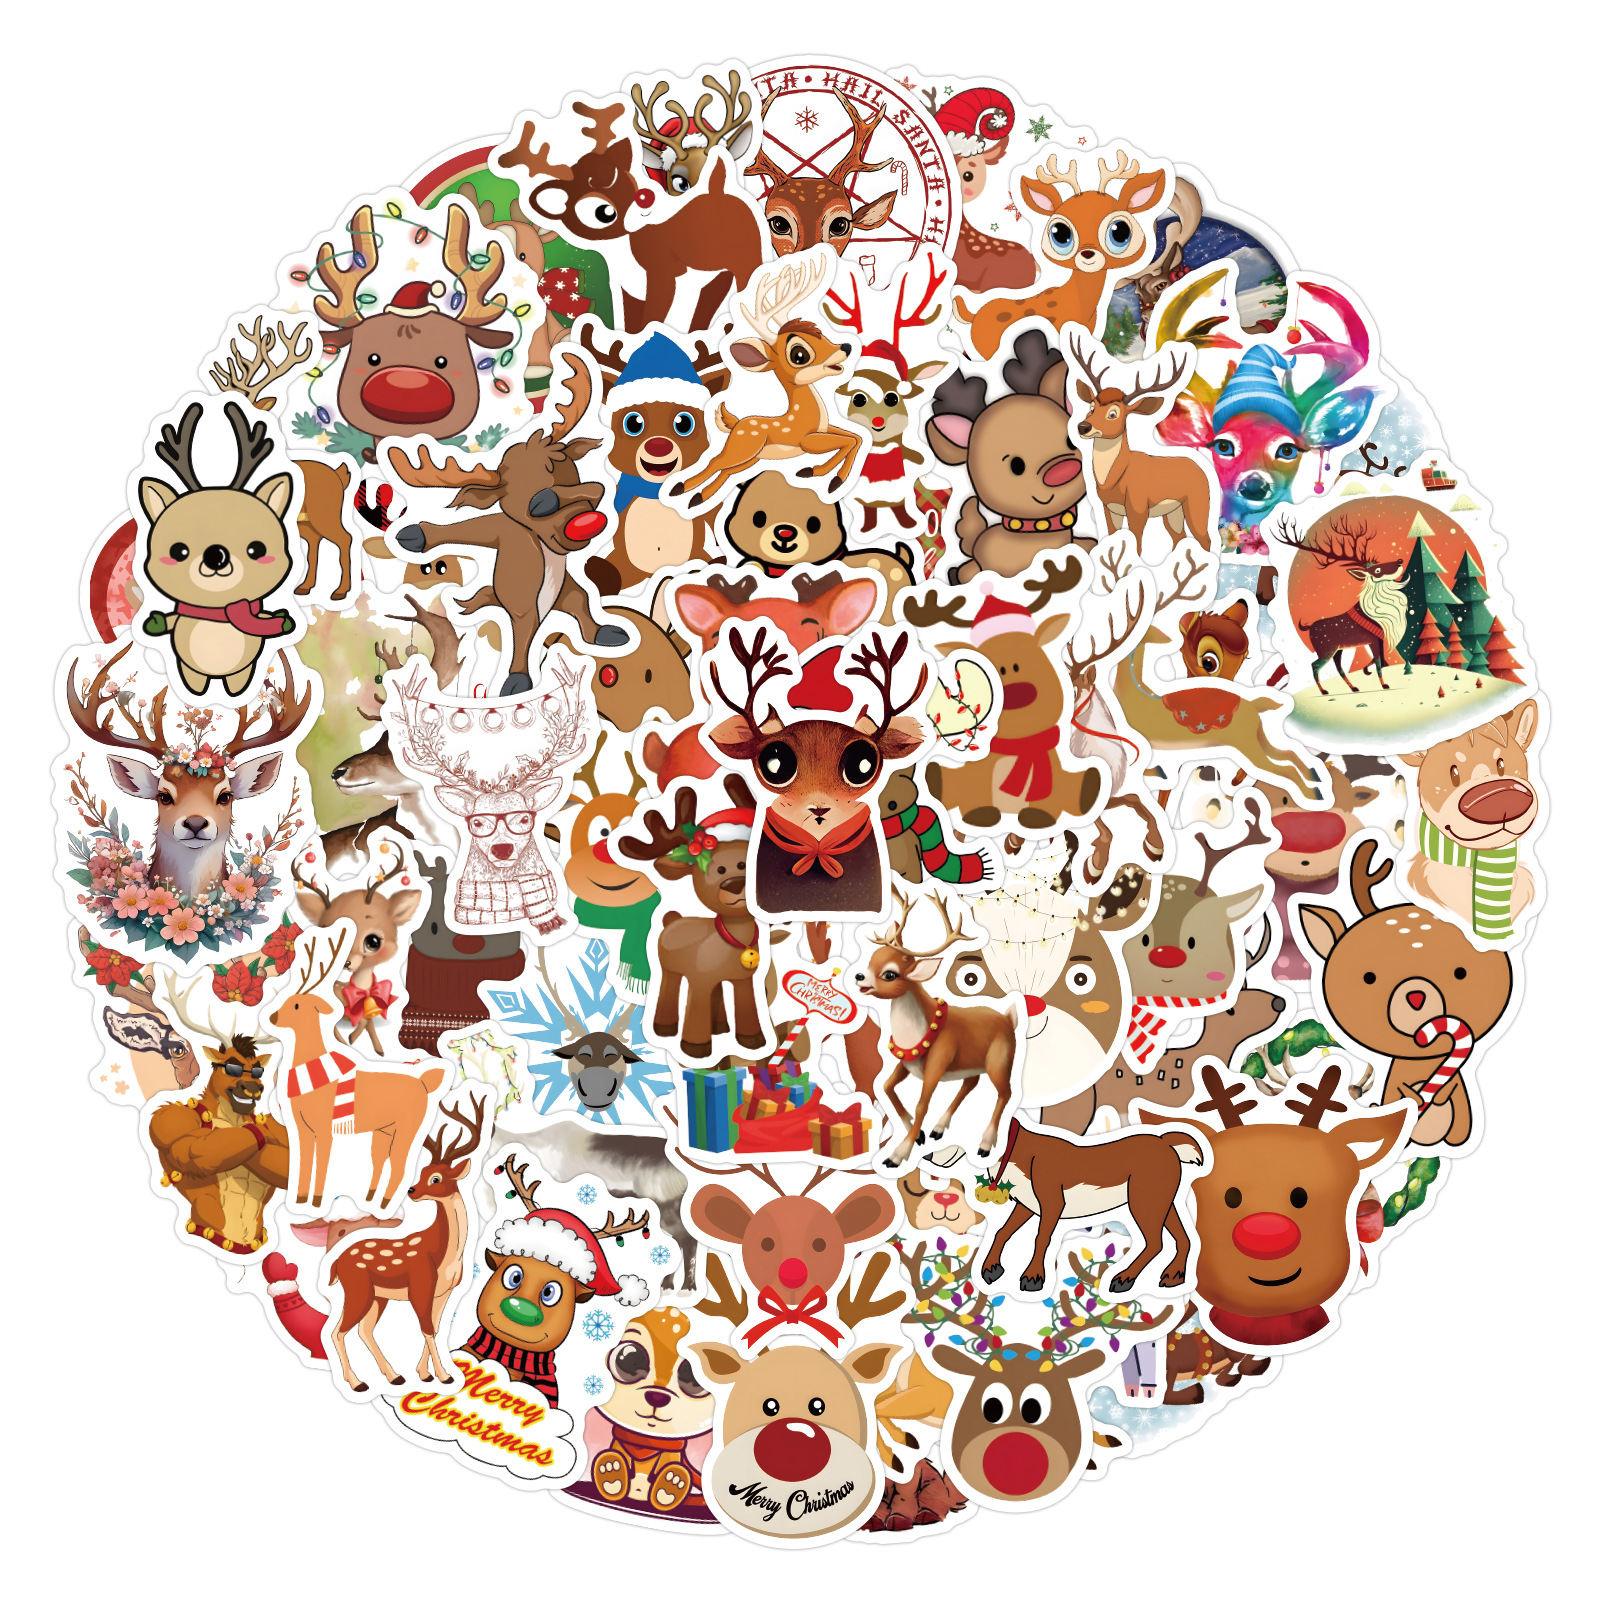 Cartoon Stickers 100PCS Stickers Gift for Teens/Kids